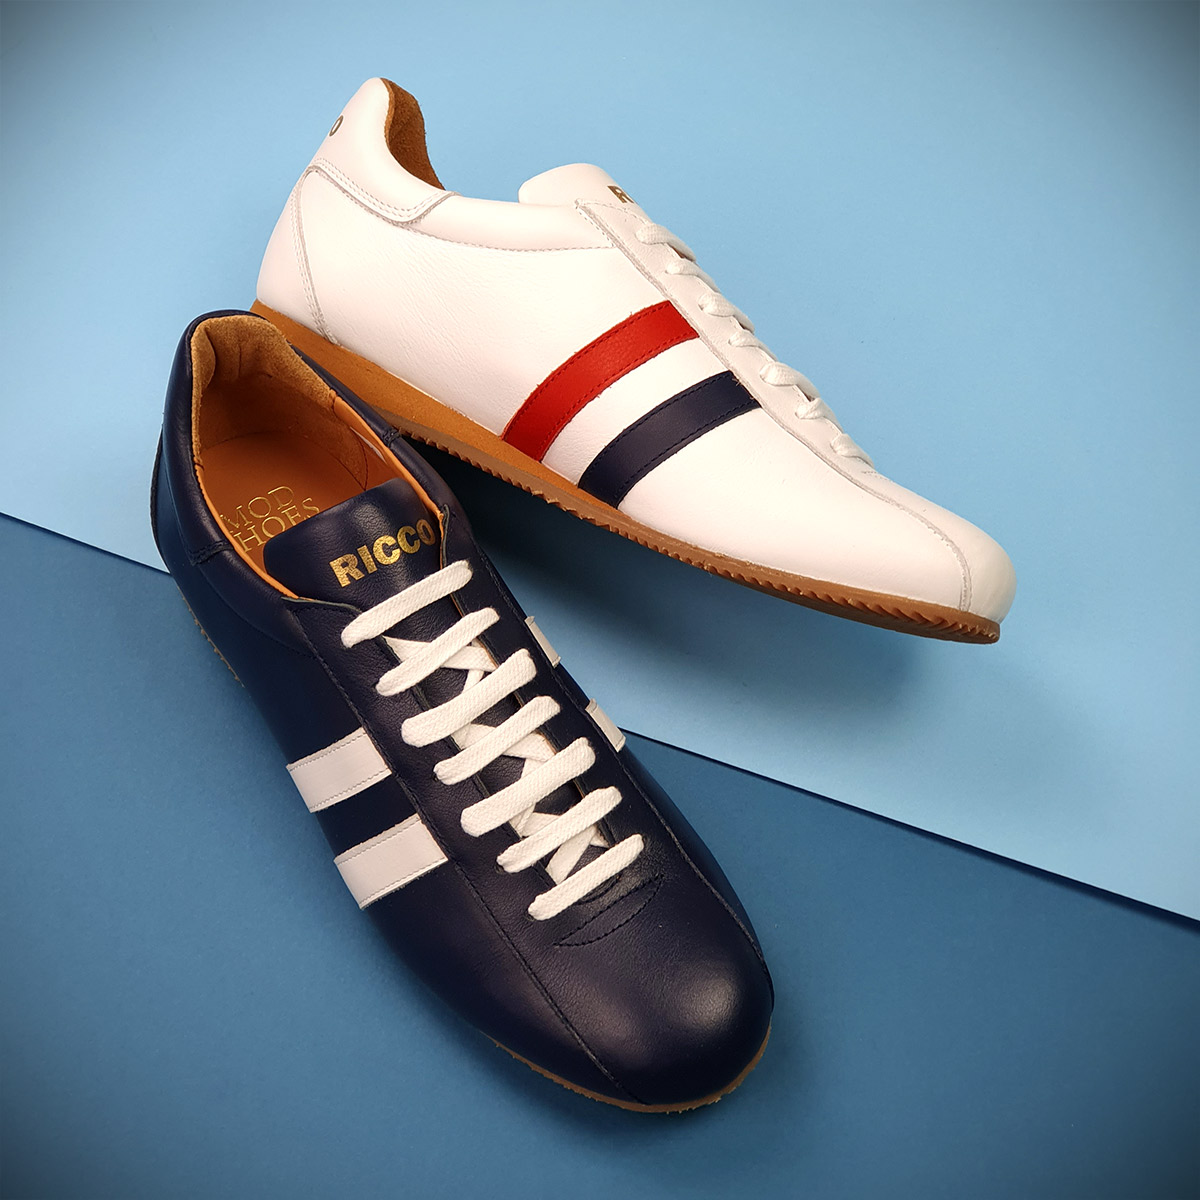 The Ricco In Blue Leather & White Stripe – Old School Trainers – Mod Shoes